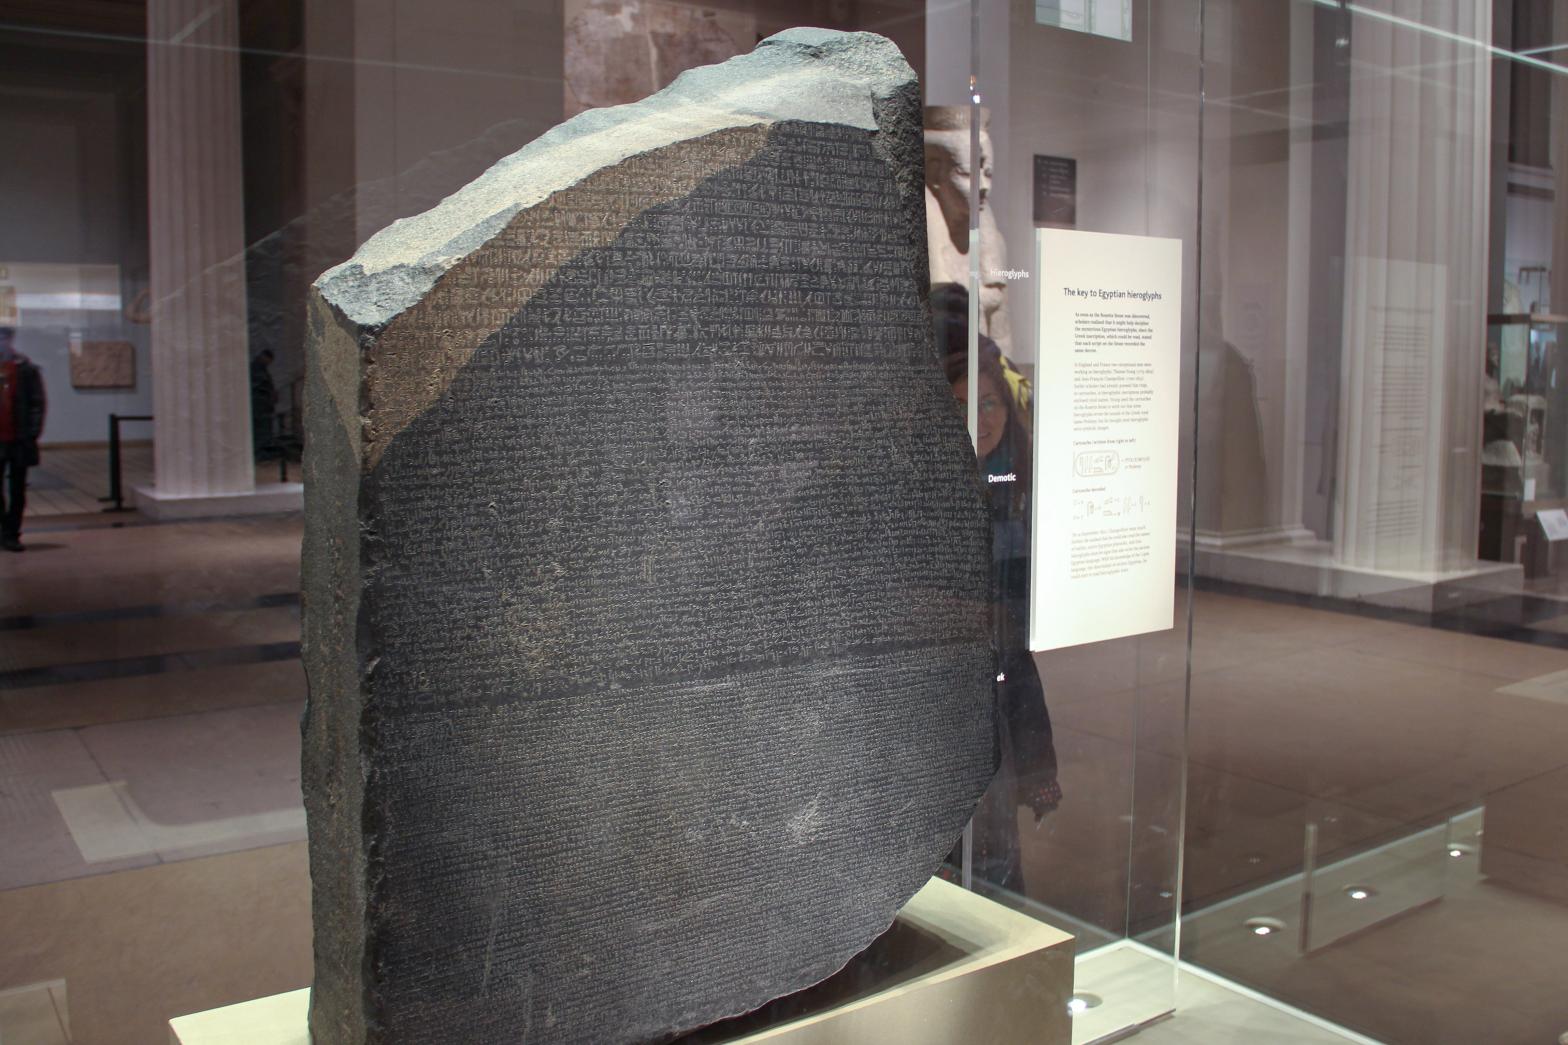 The Rosetta Stone has been housed at the British Museum since 1802. (Photo: Daniel Kalker, AP)